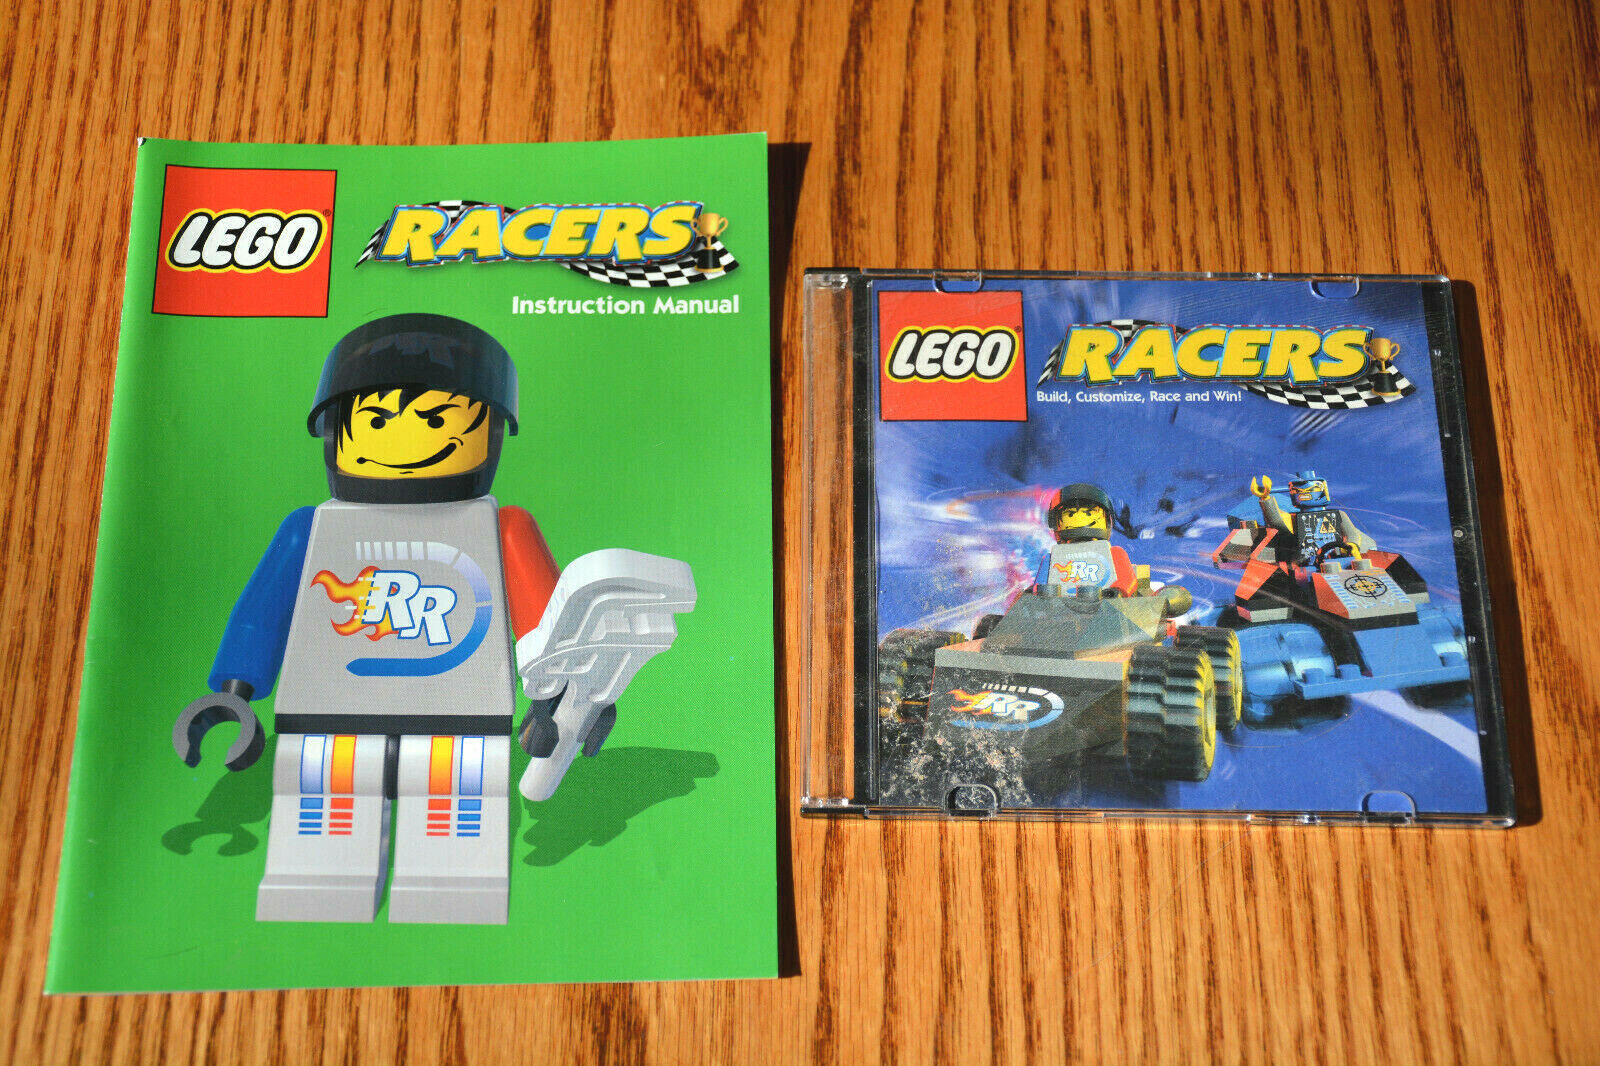 Lego Racers PC CD-ROM with instruction manual Windows 95/98